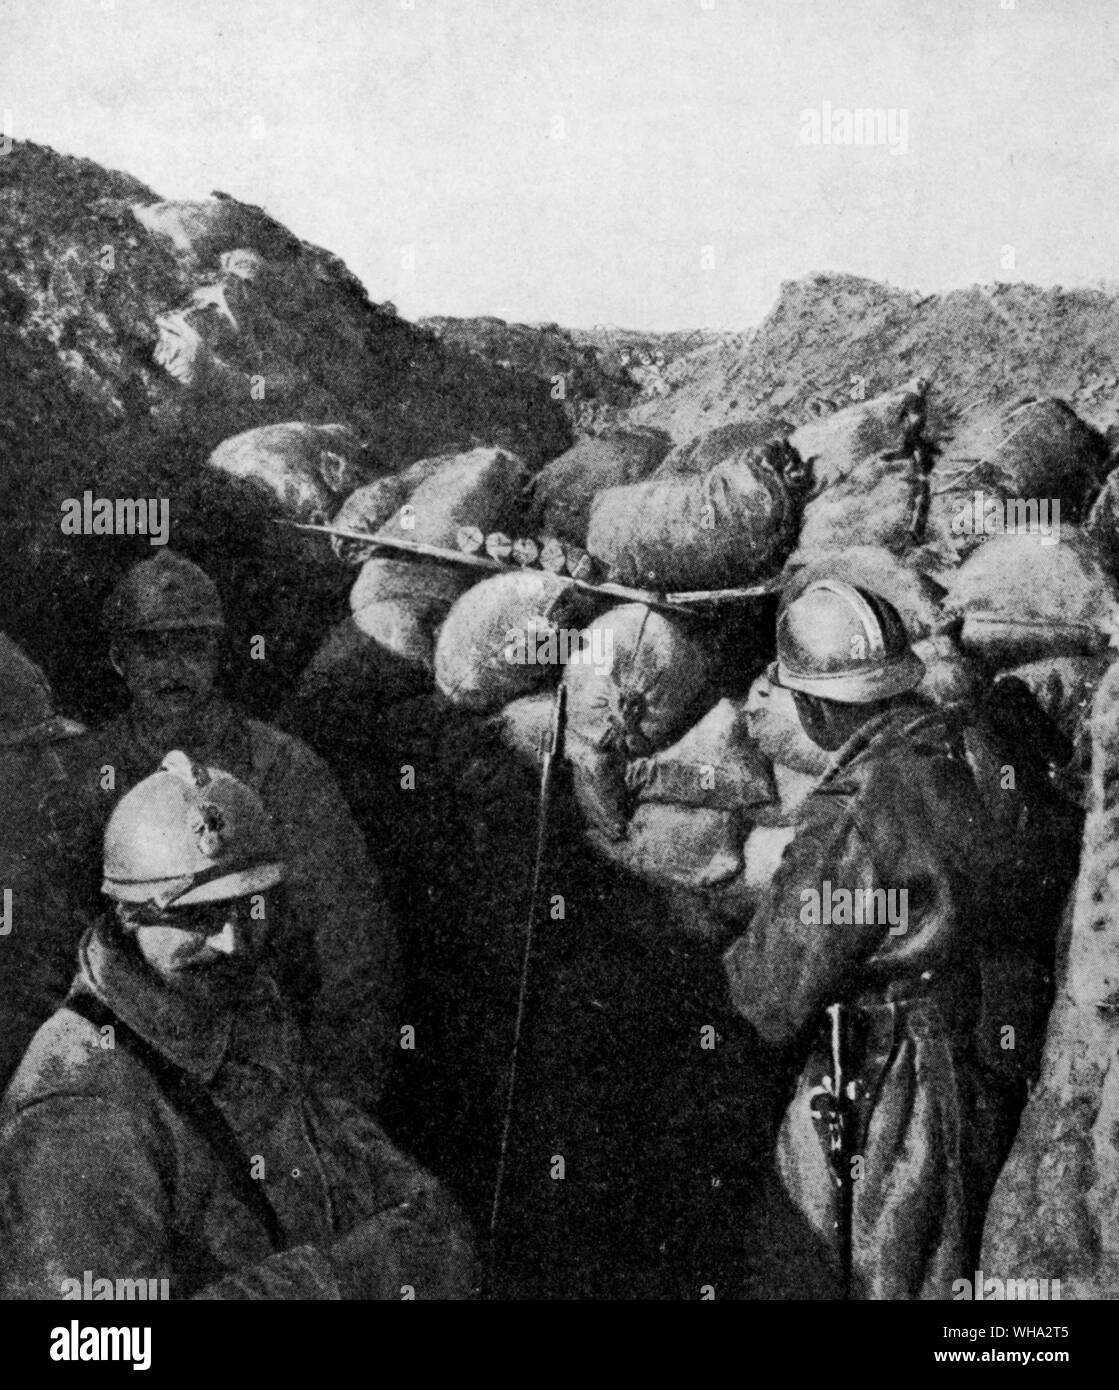 Enemies in the same trench. French soldiers in the foreground divided from the Germans in the distance only by sandbag traverses. Stock Photo